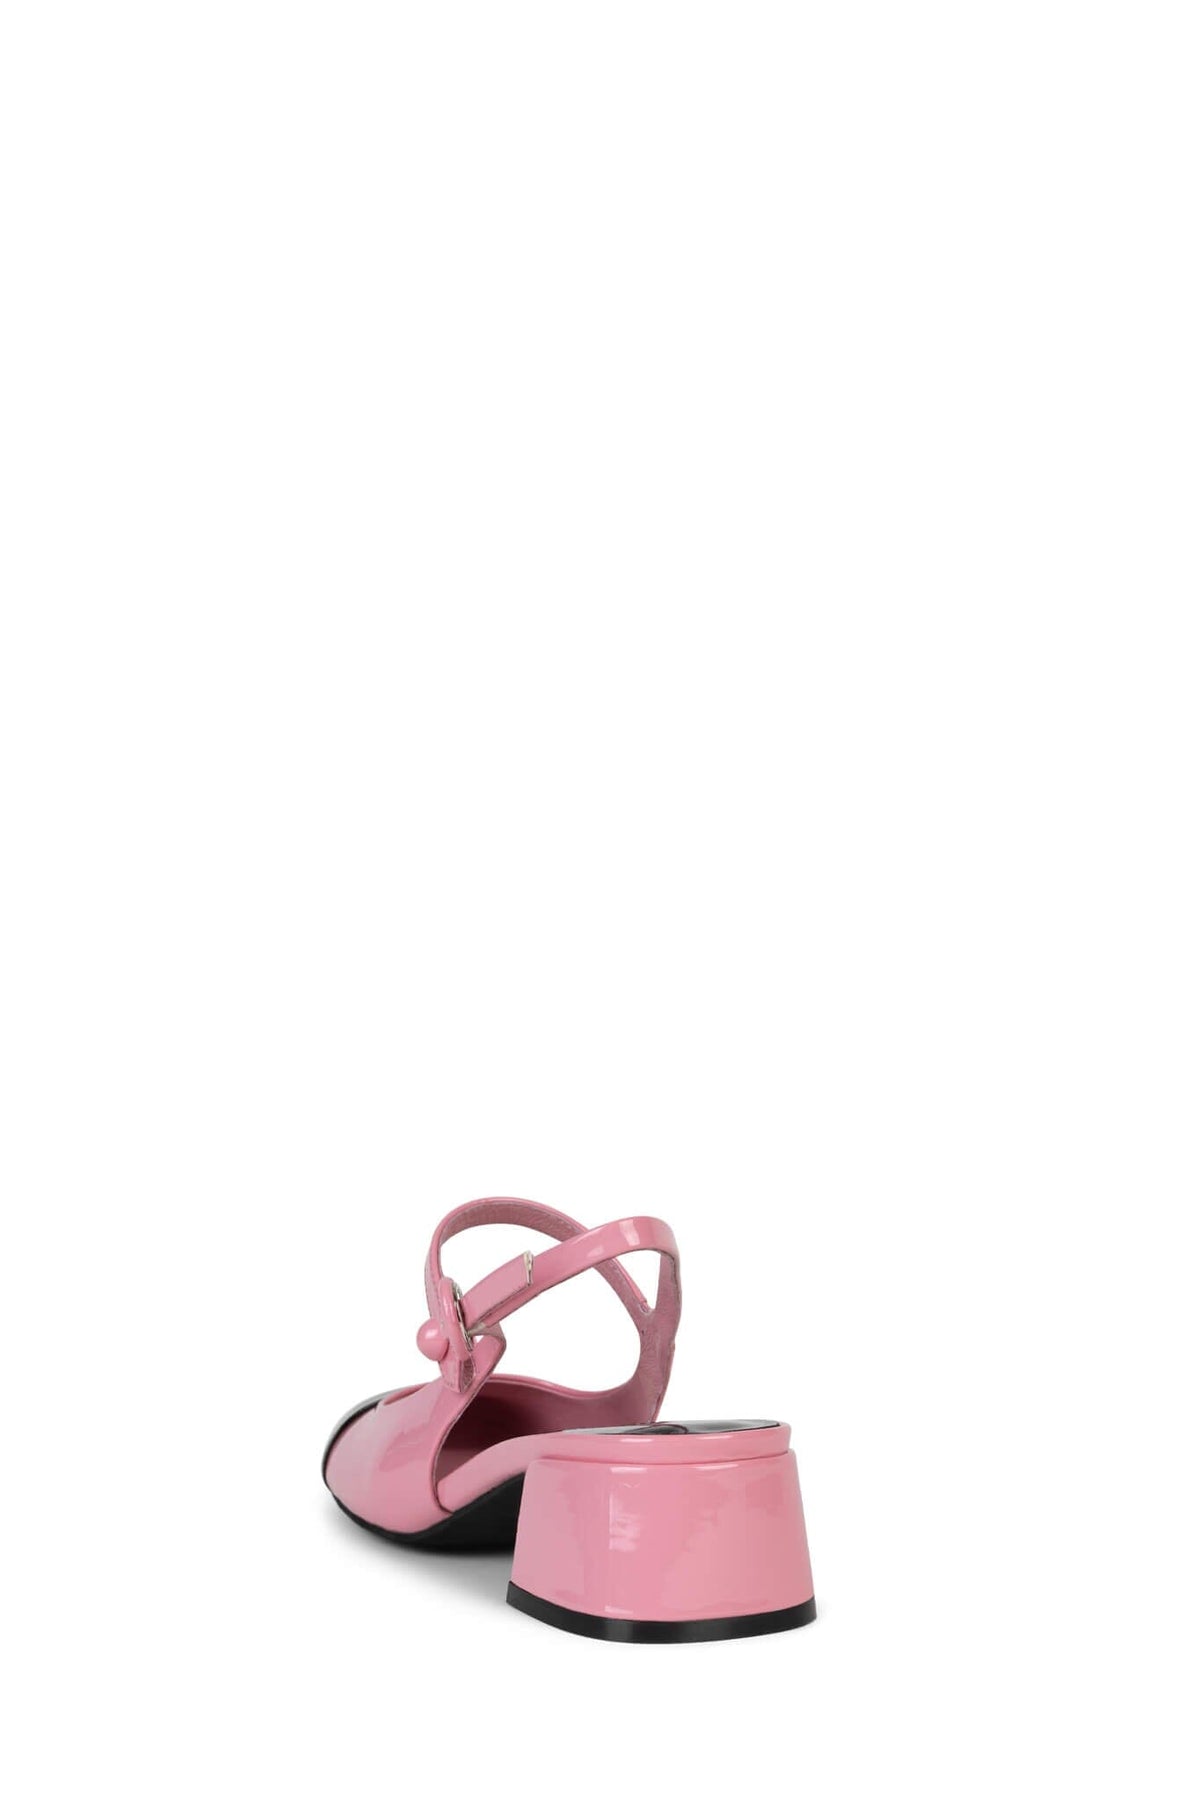 COU-COU Jeffrey Campbell Slingback Mary Janes Pink Patent Black Patent